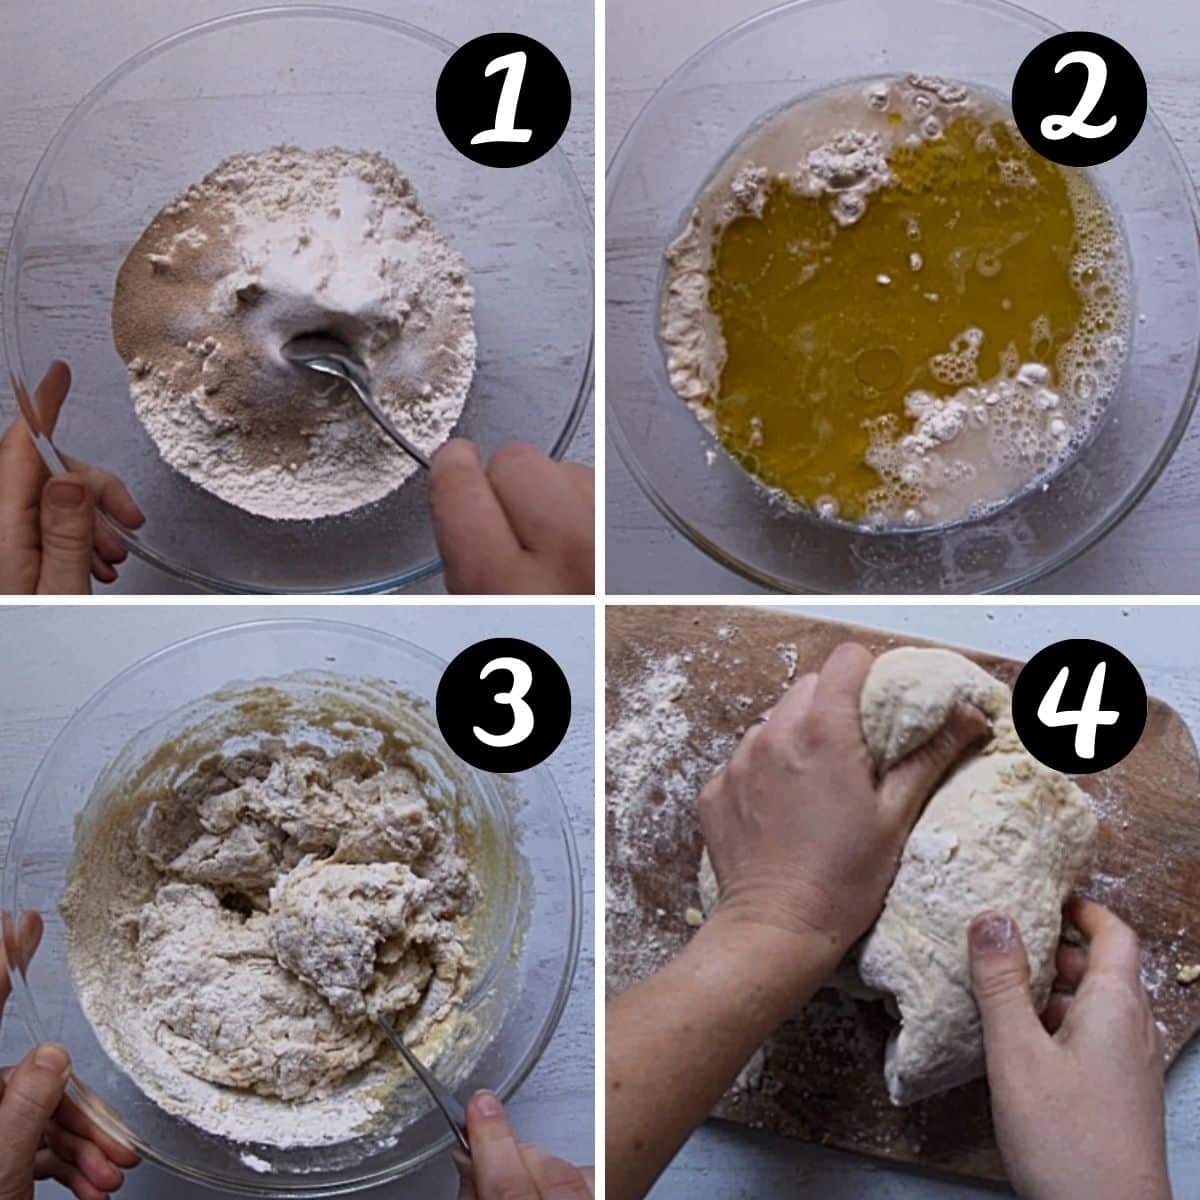 steps showing pizza dough being mixed in a bowl and hands kneading dough